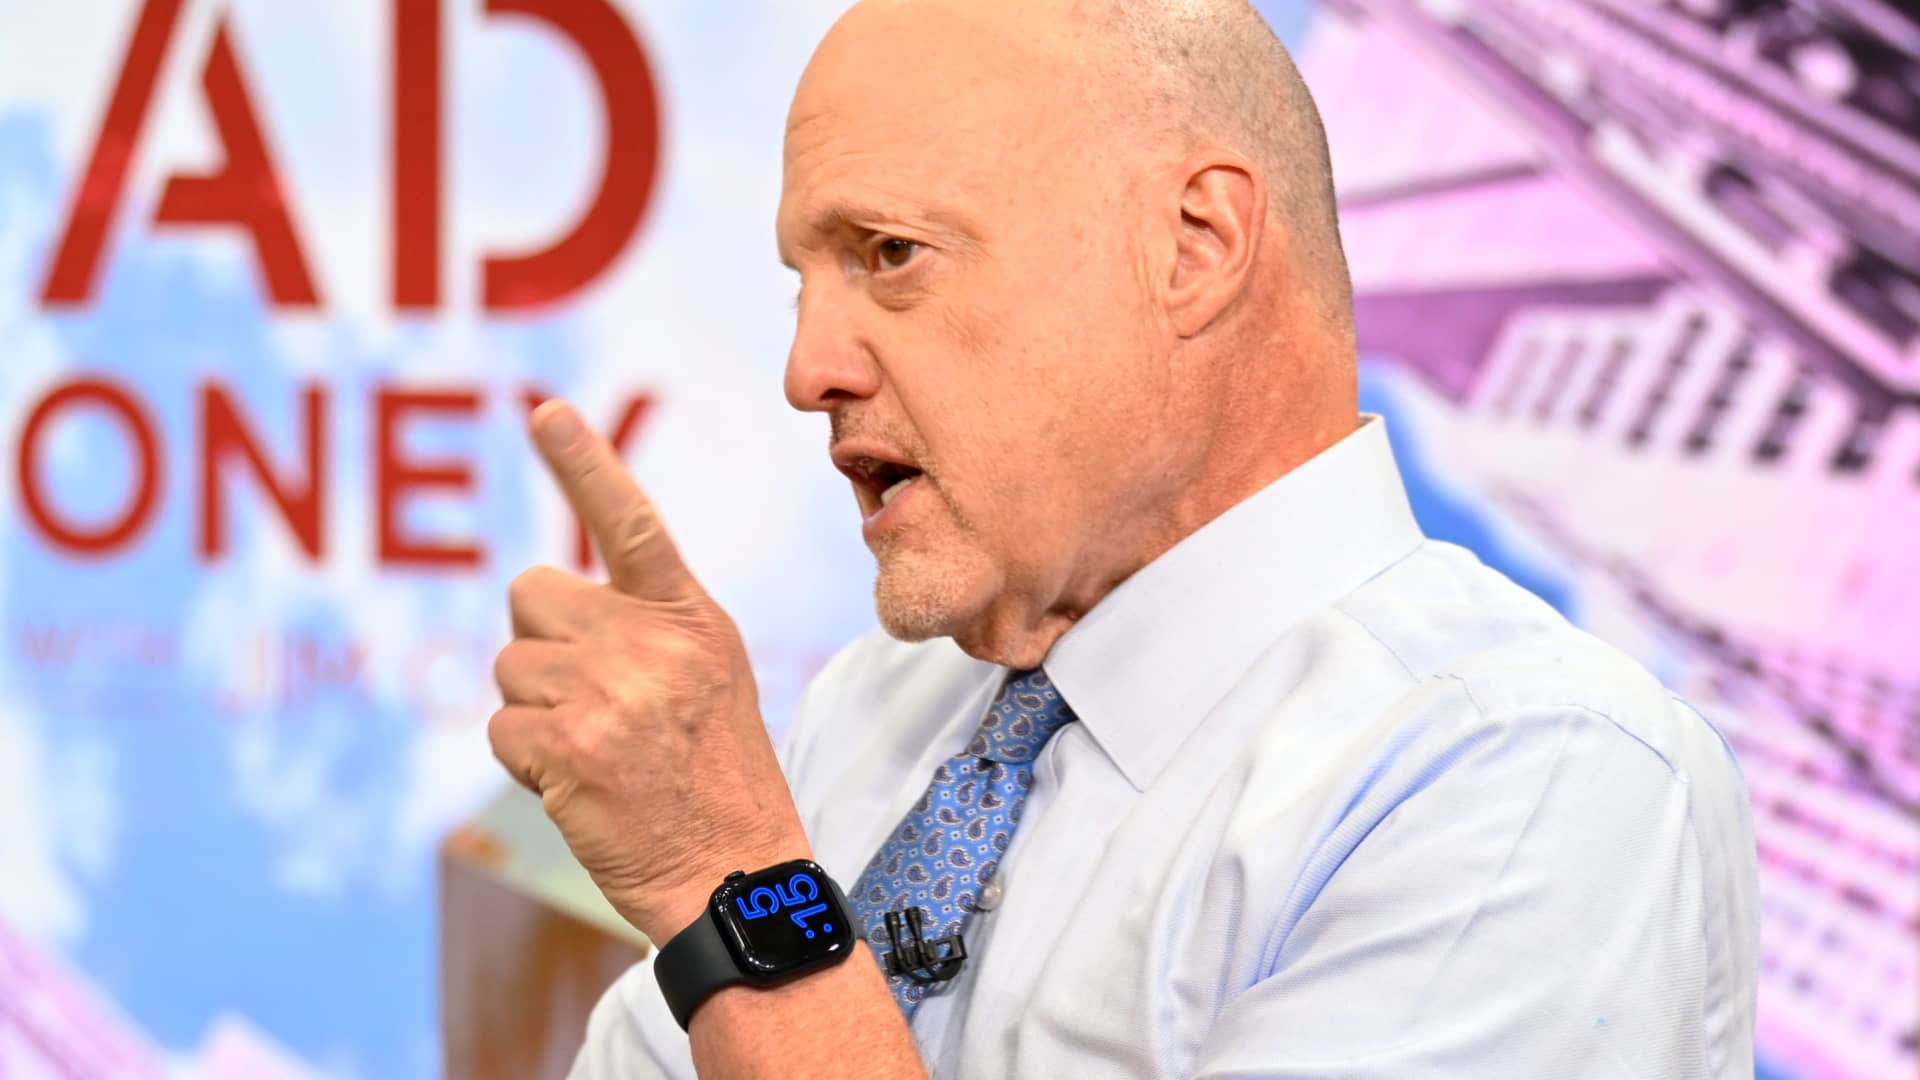 Jim Cramer says he expects ‘many layoffs’ at companies after Christmas